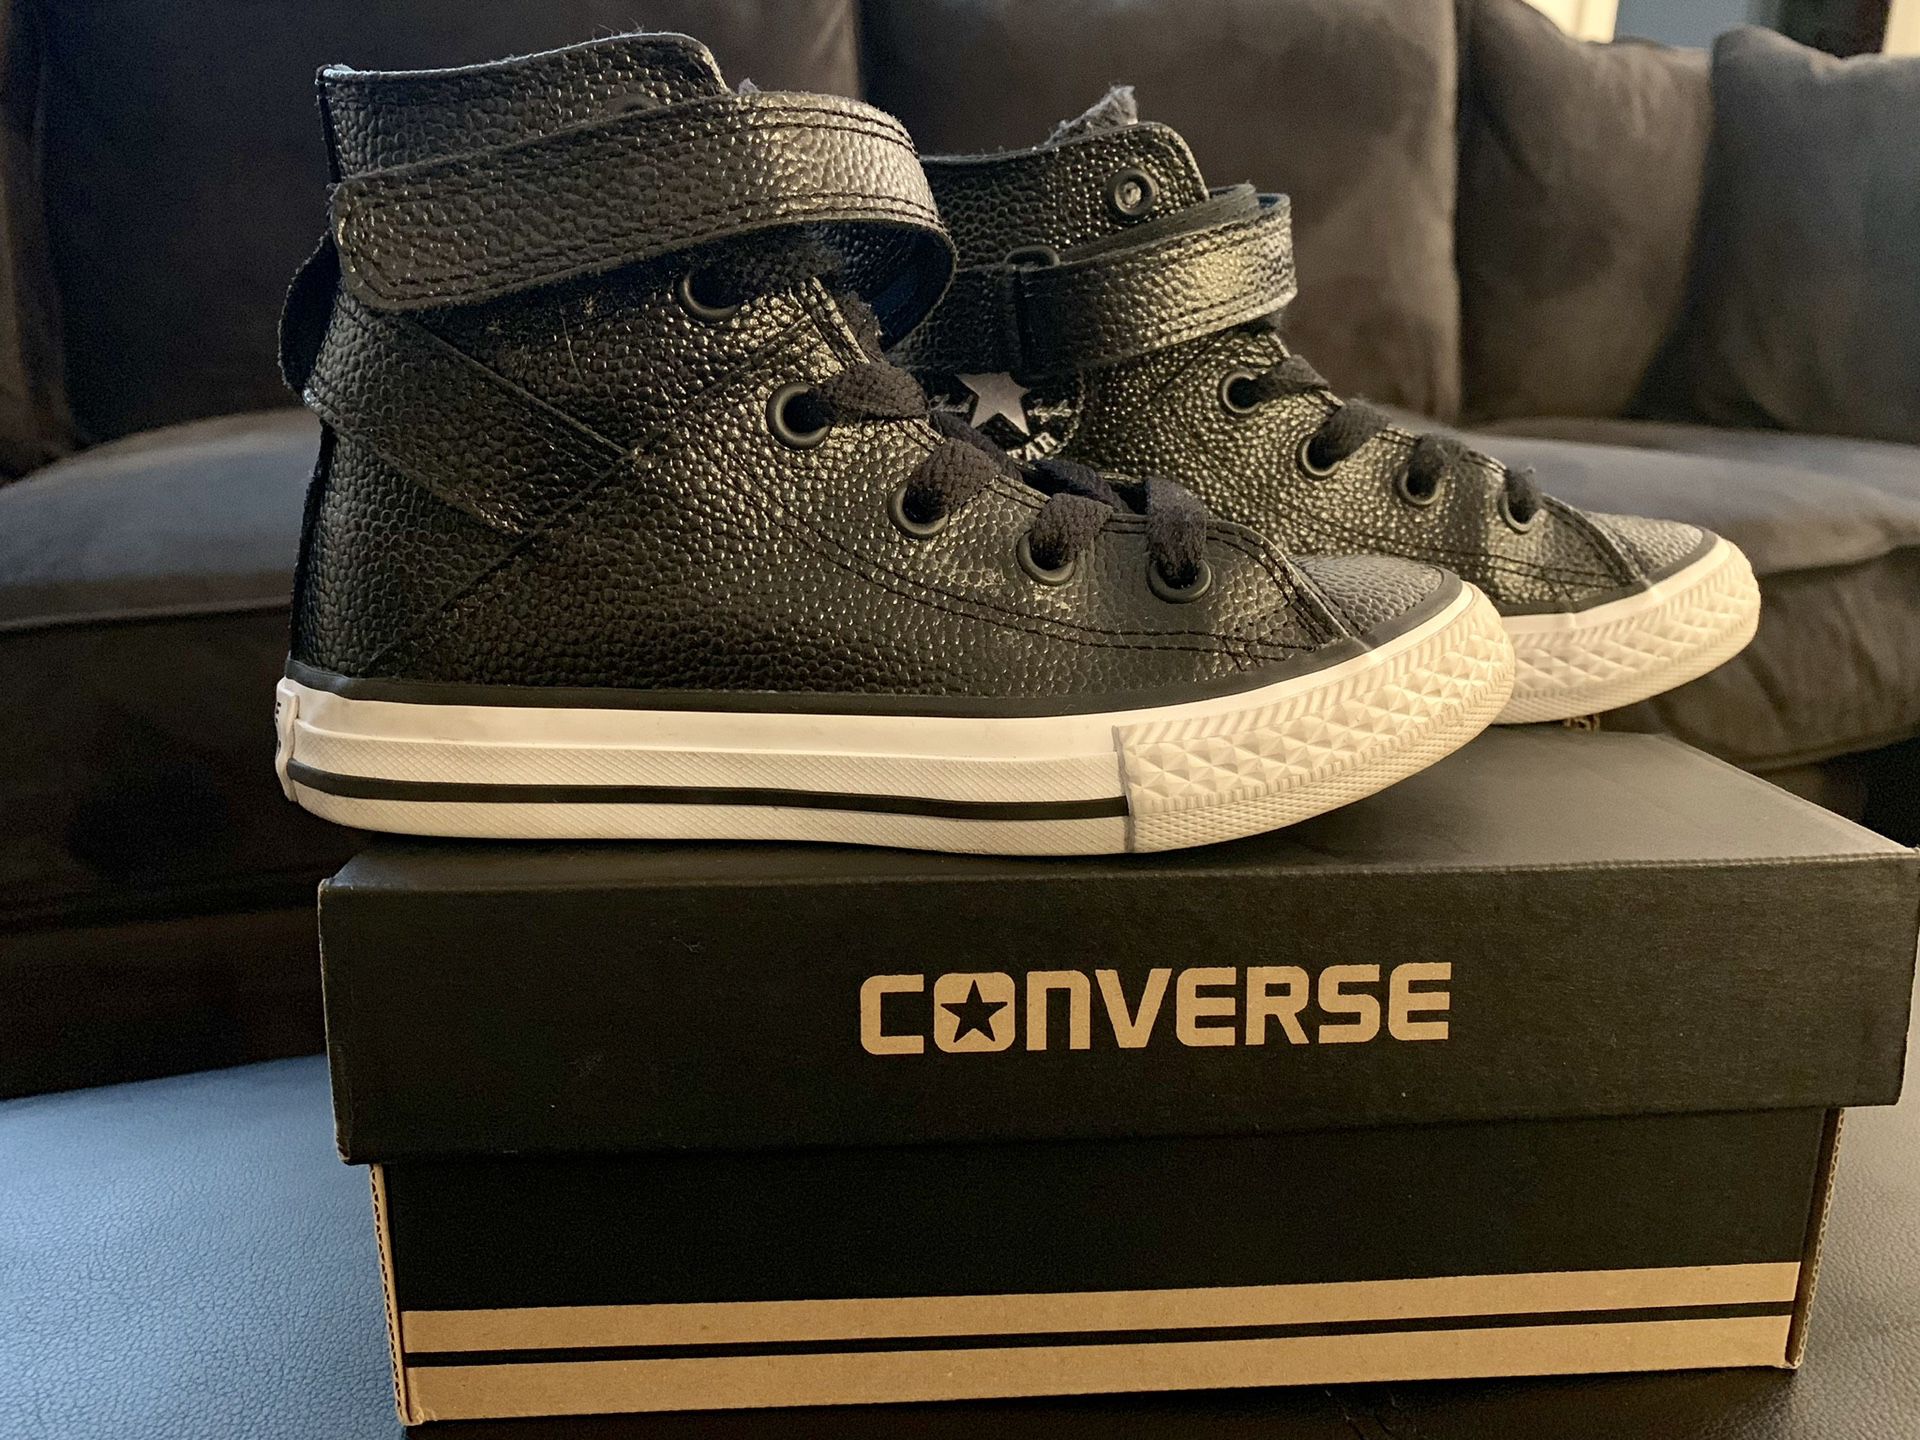 Kid’s Converse (High Top Leather) size 12